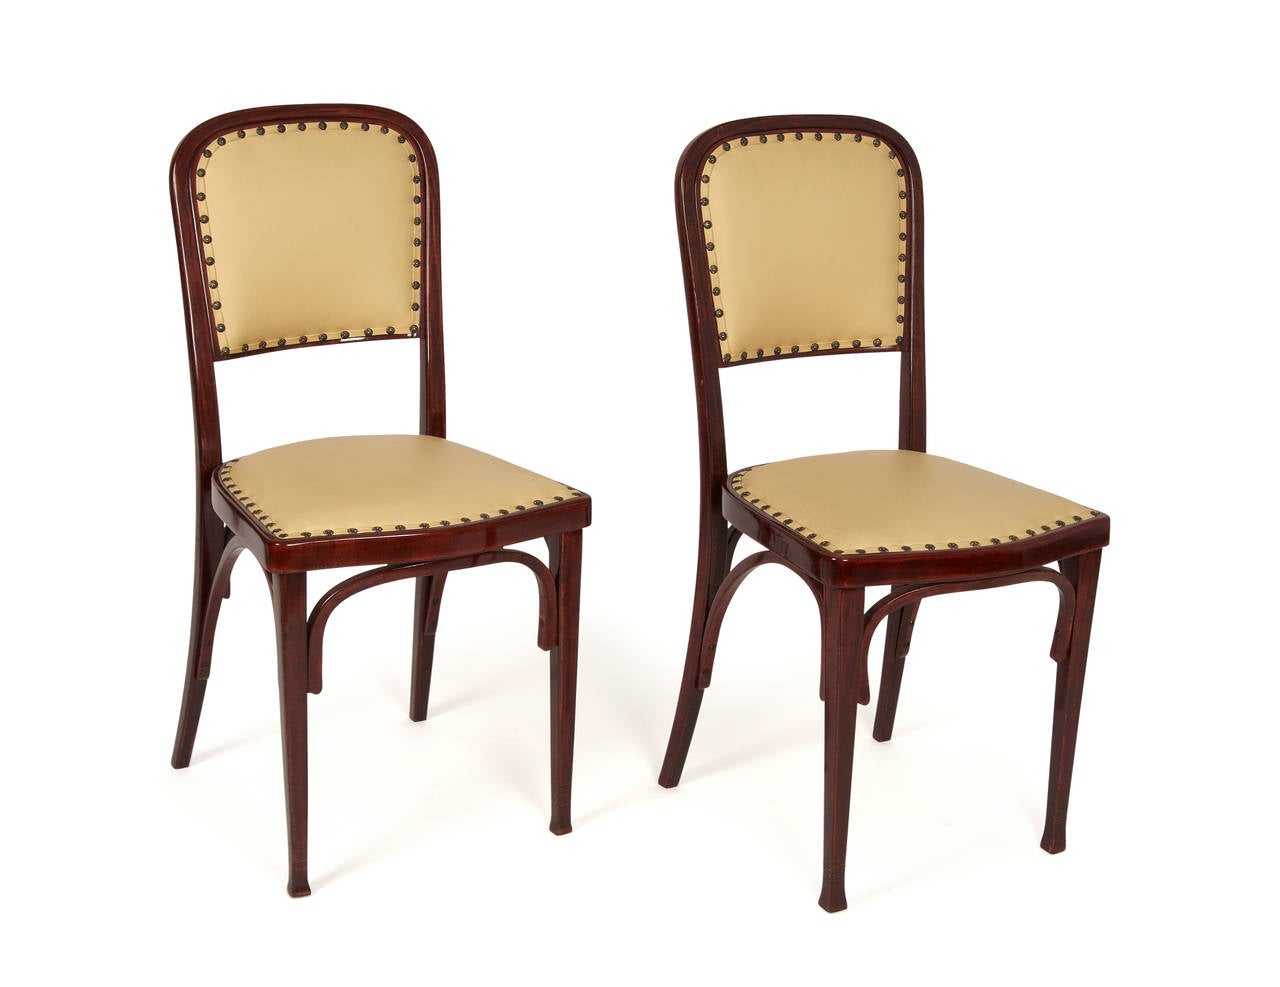 This Suite consist of six parts:
Two chairs, three armchairs,
One bench
Manufactured by: Jacob & Josef Kohn, Vienna, catalogue no. 715
Designed by Gustav Siegel for world fair 1900 in Paris.
Beech, bent wood, mahogany colored stained, leather